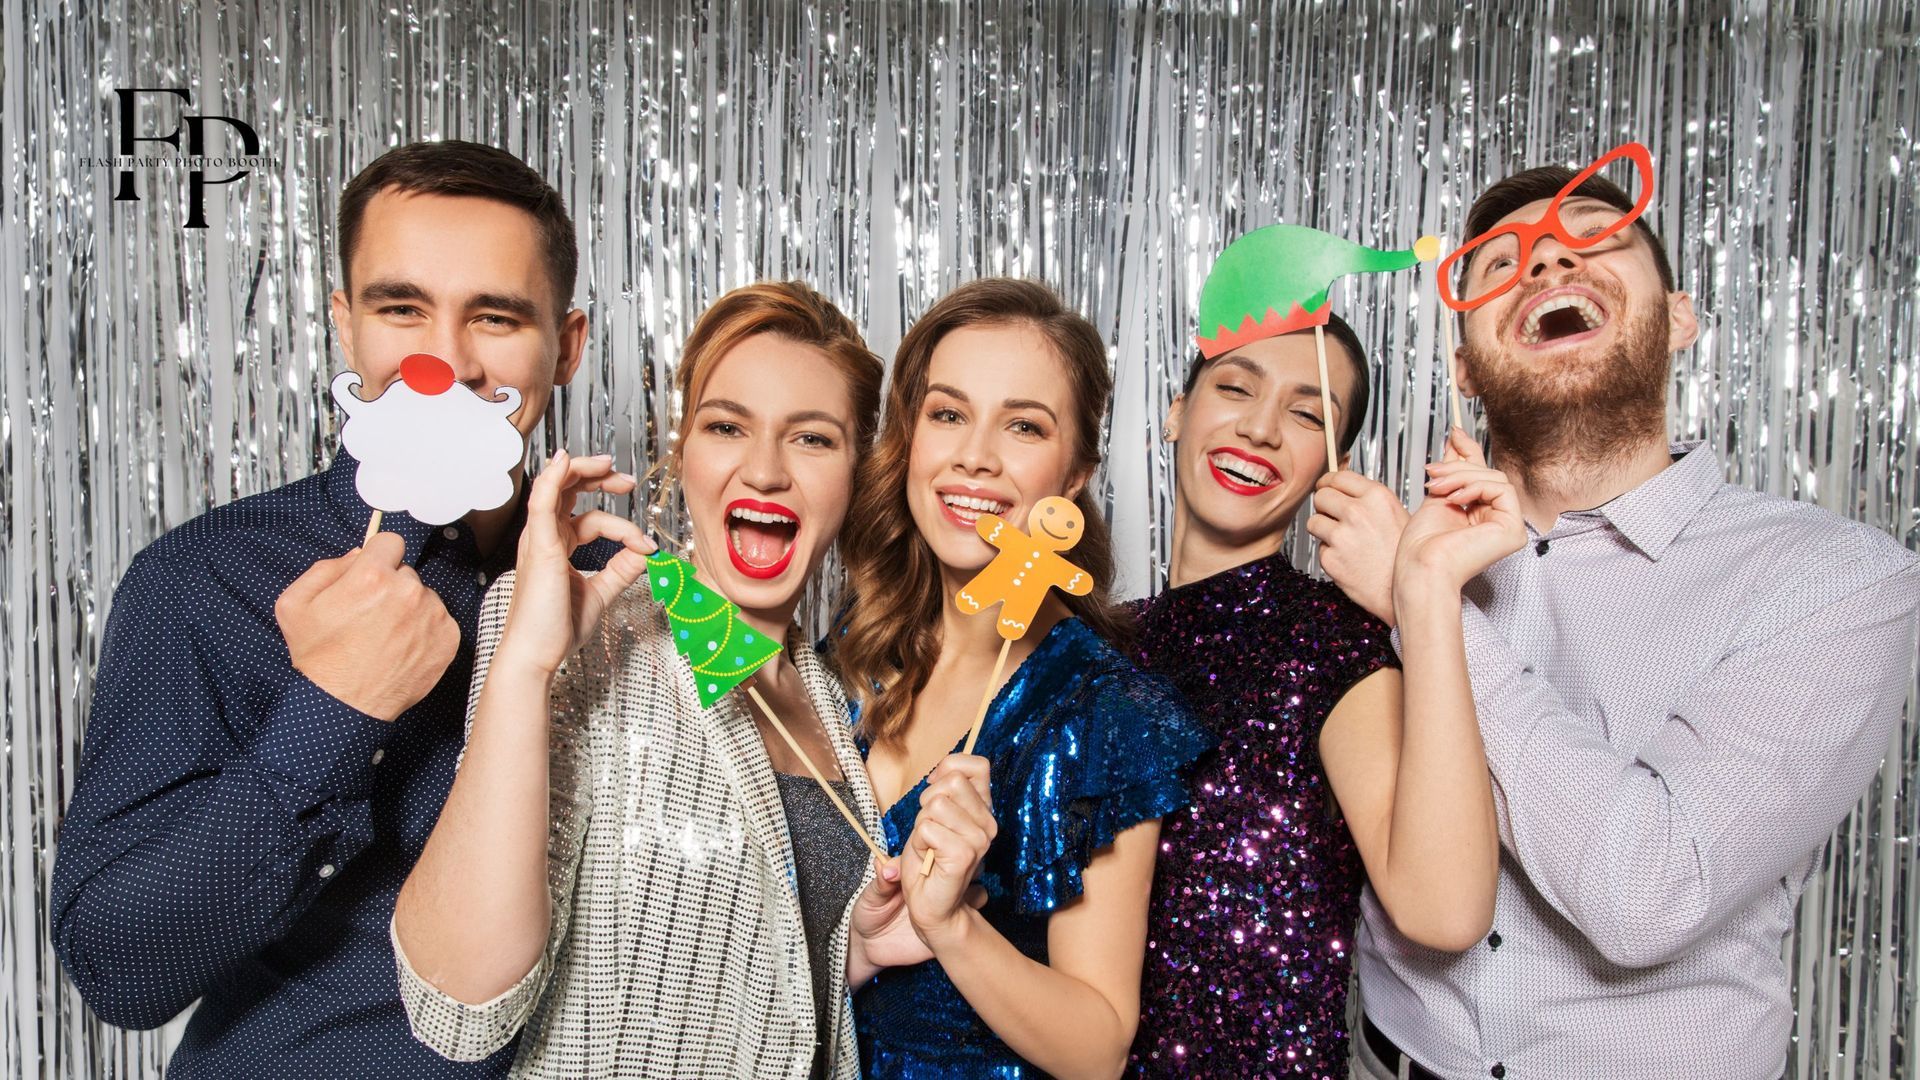 The celebrant with her friends having fun at a photo booth rental in North Austin